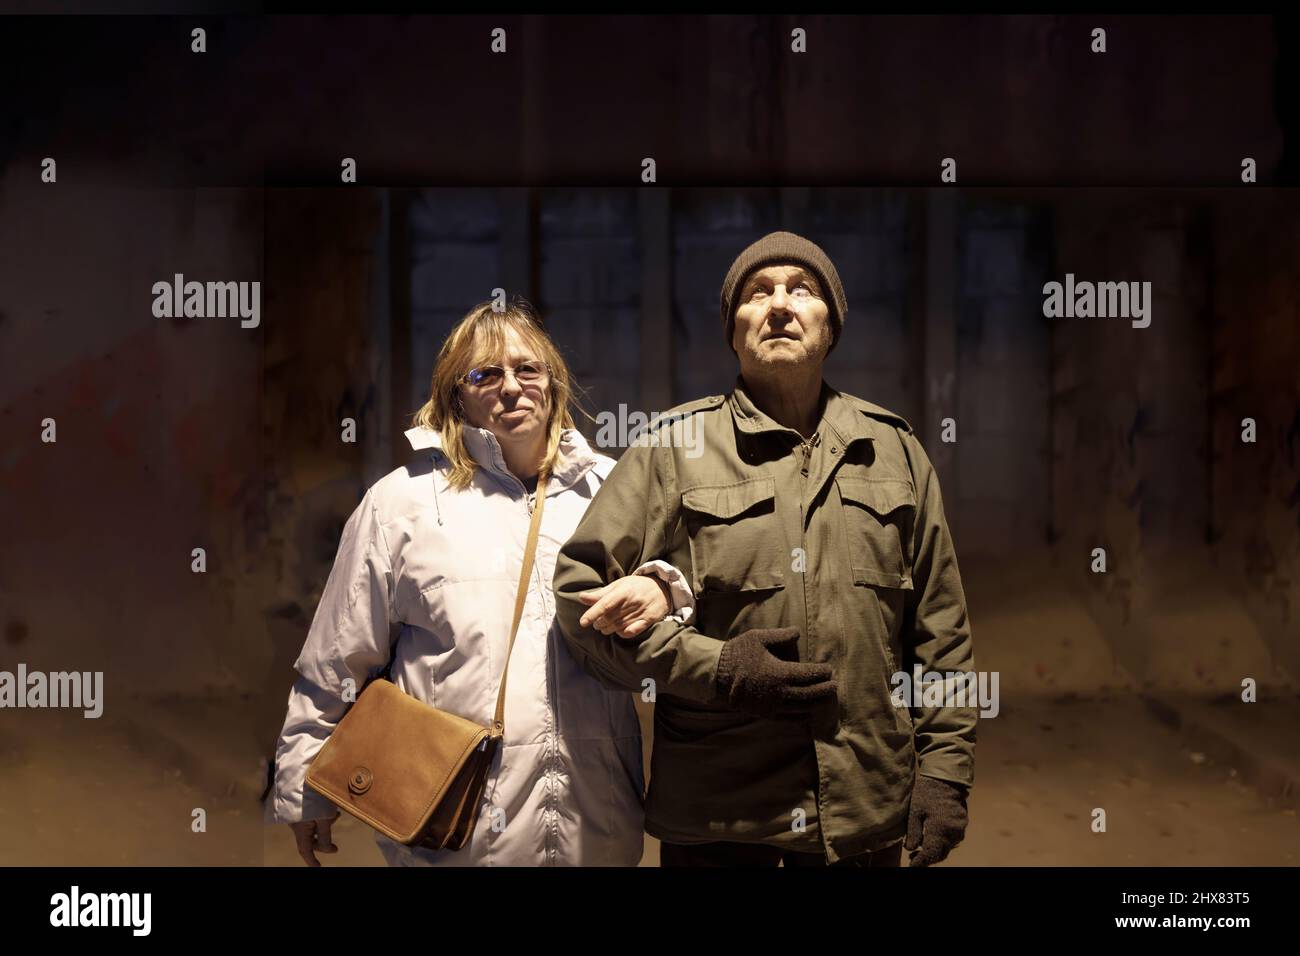 Elderly wife and husband standing together in a nuclear shelter Stock Photo